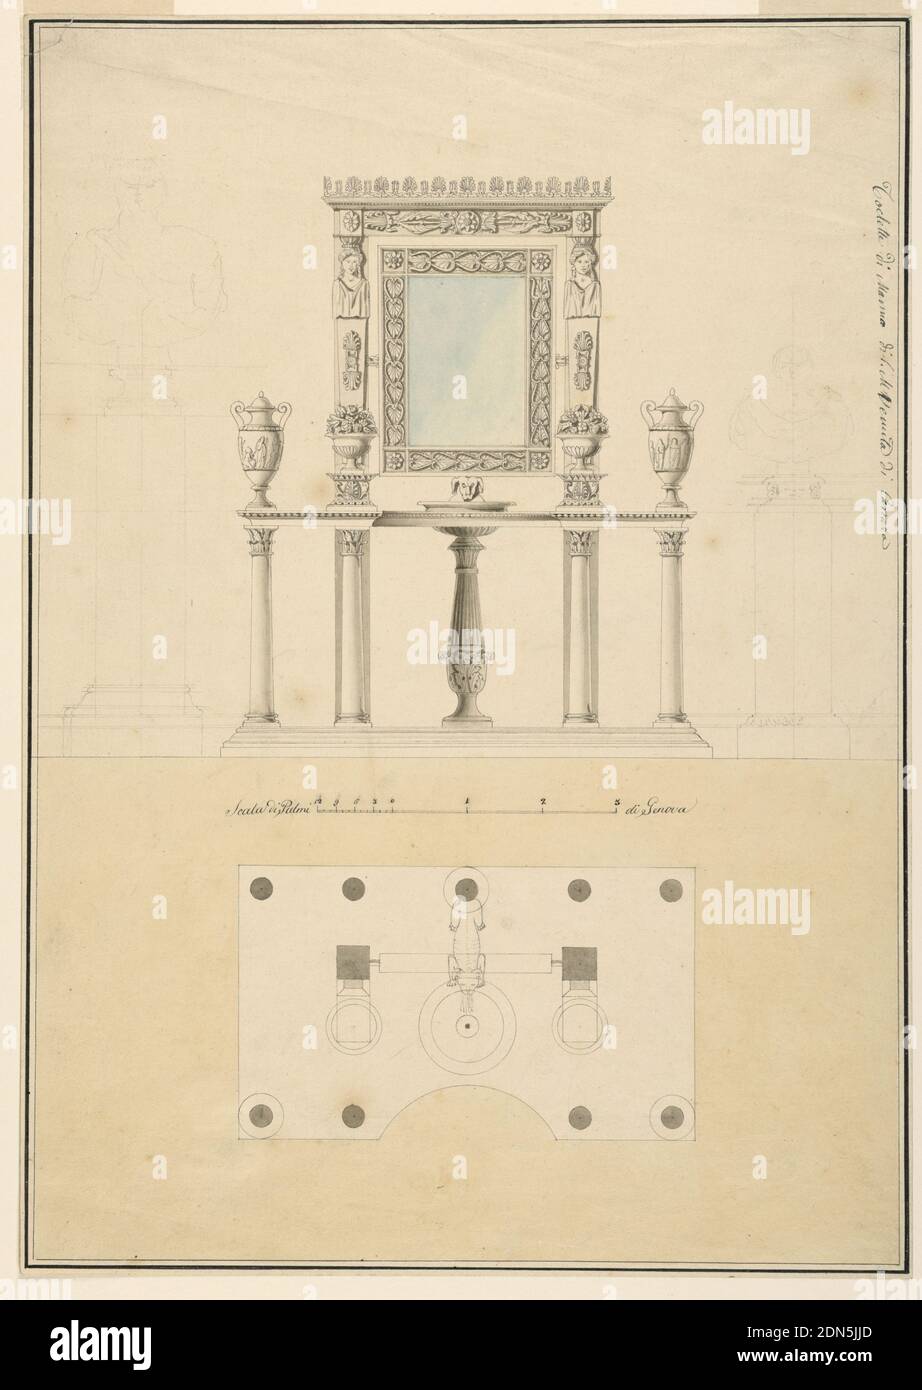 Elevation and Plan of Wash Basin and Mirror in Carrara Marble, Pen and black ink, brush and yellow, gray and blue wash, graphite on wove paper, Elevation and plan of a washstand with mirror. On either side are two pedestals each with a ceramic vase and an amphora sitting on top., Carrara, Italy, early 19th century, furniture, Drawing Stock Photo